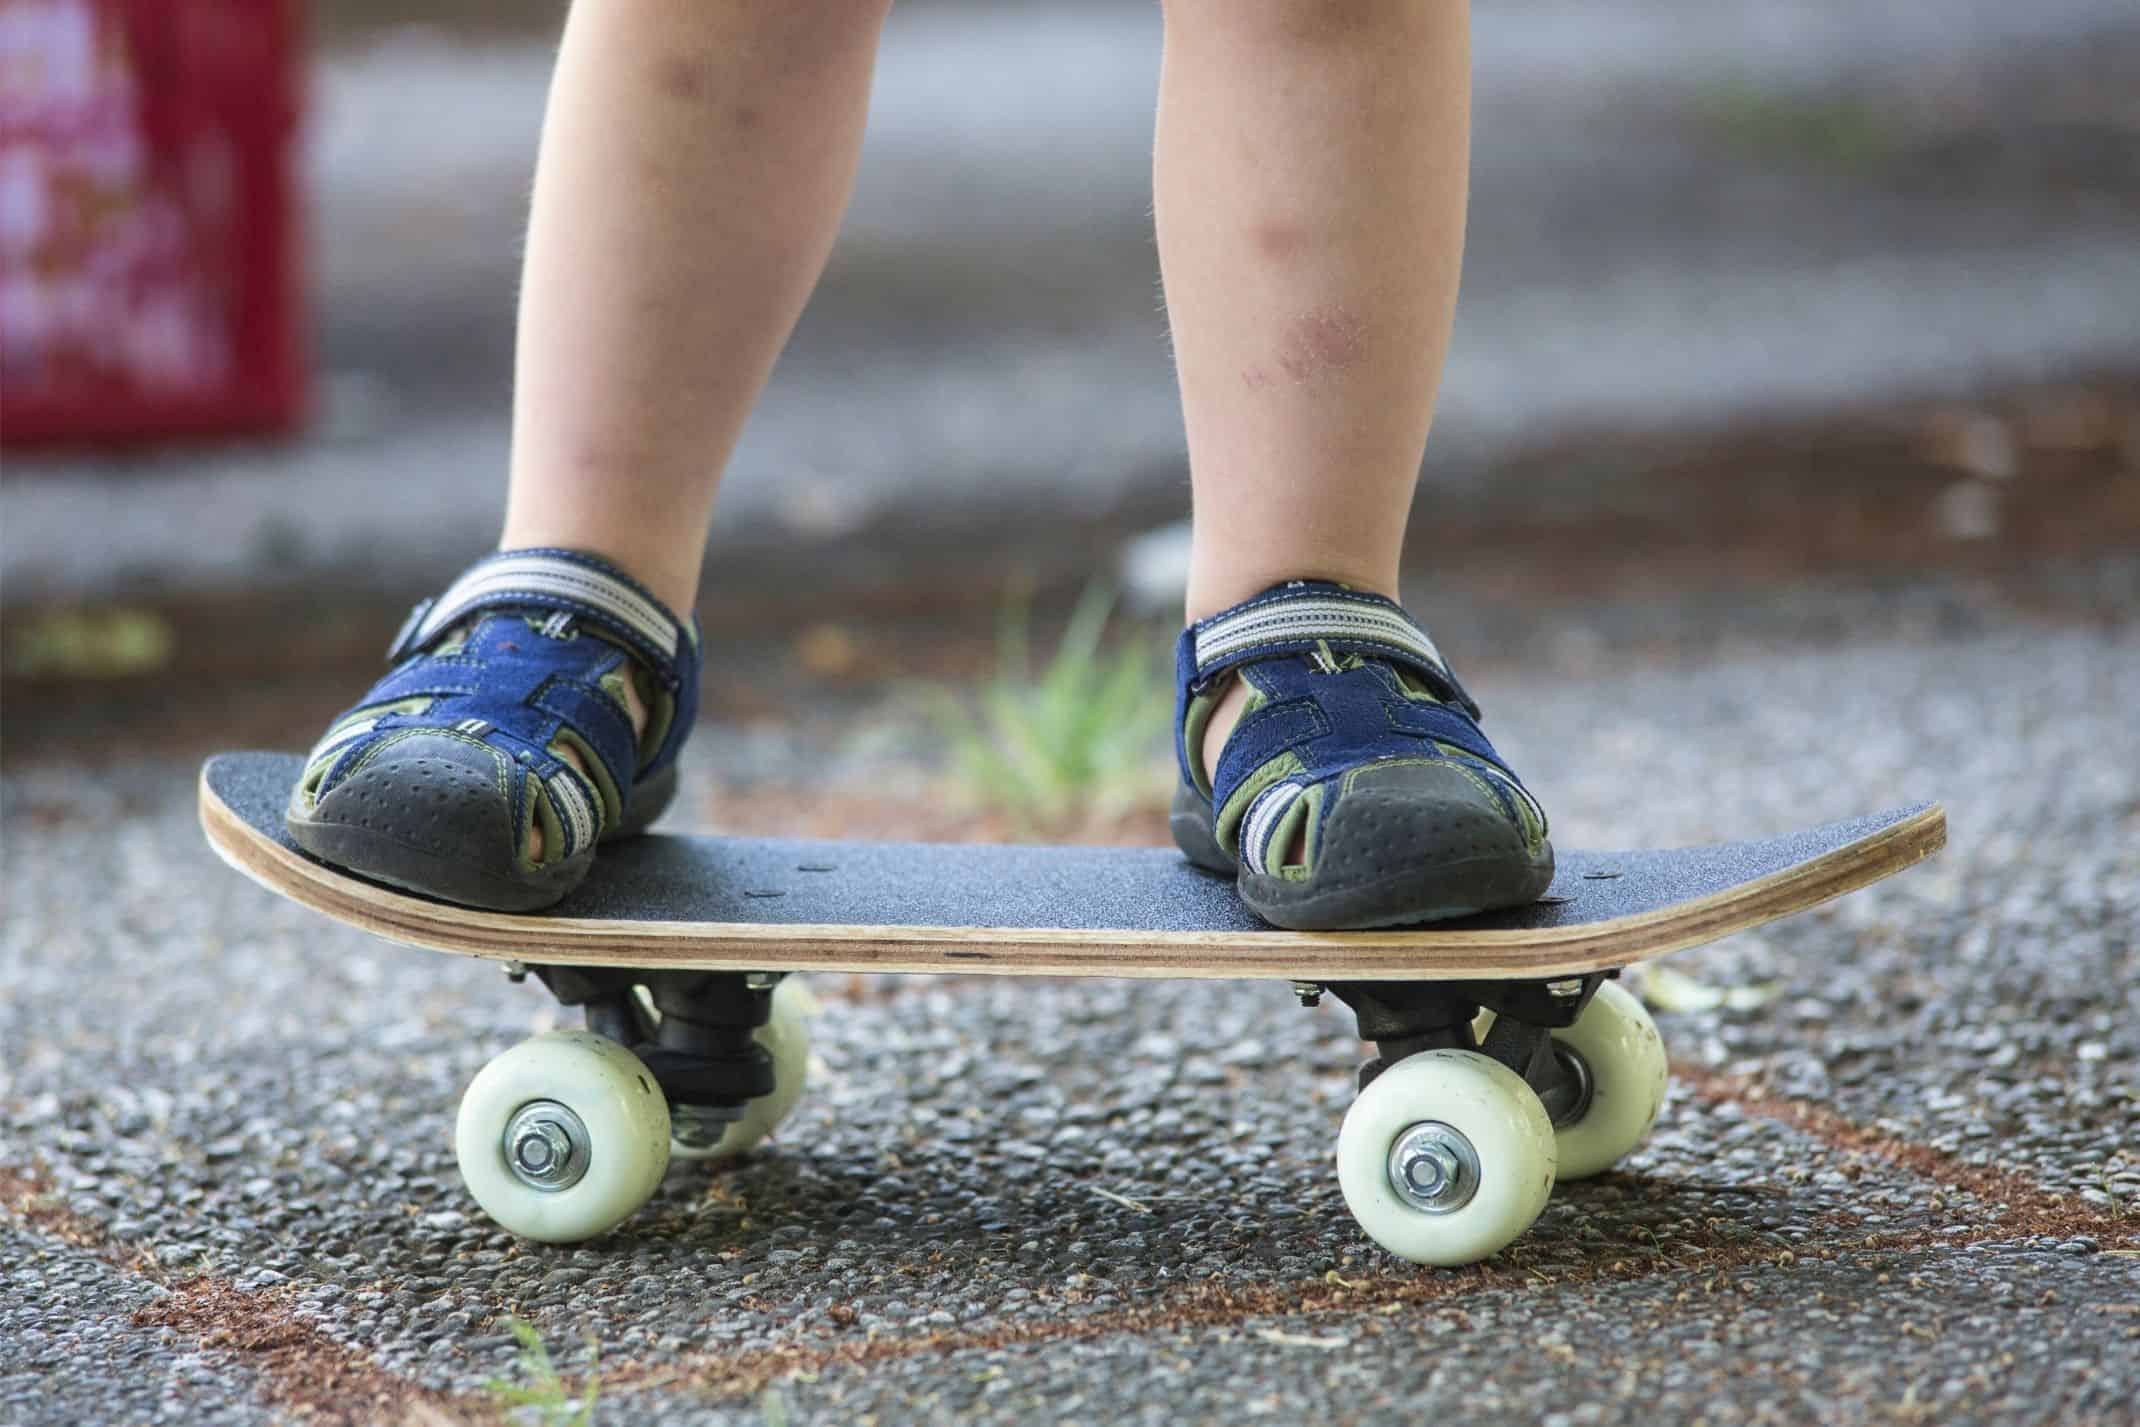 Best-Skateboards-For-5-year-old-Kids-